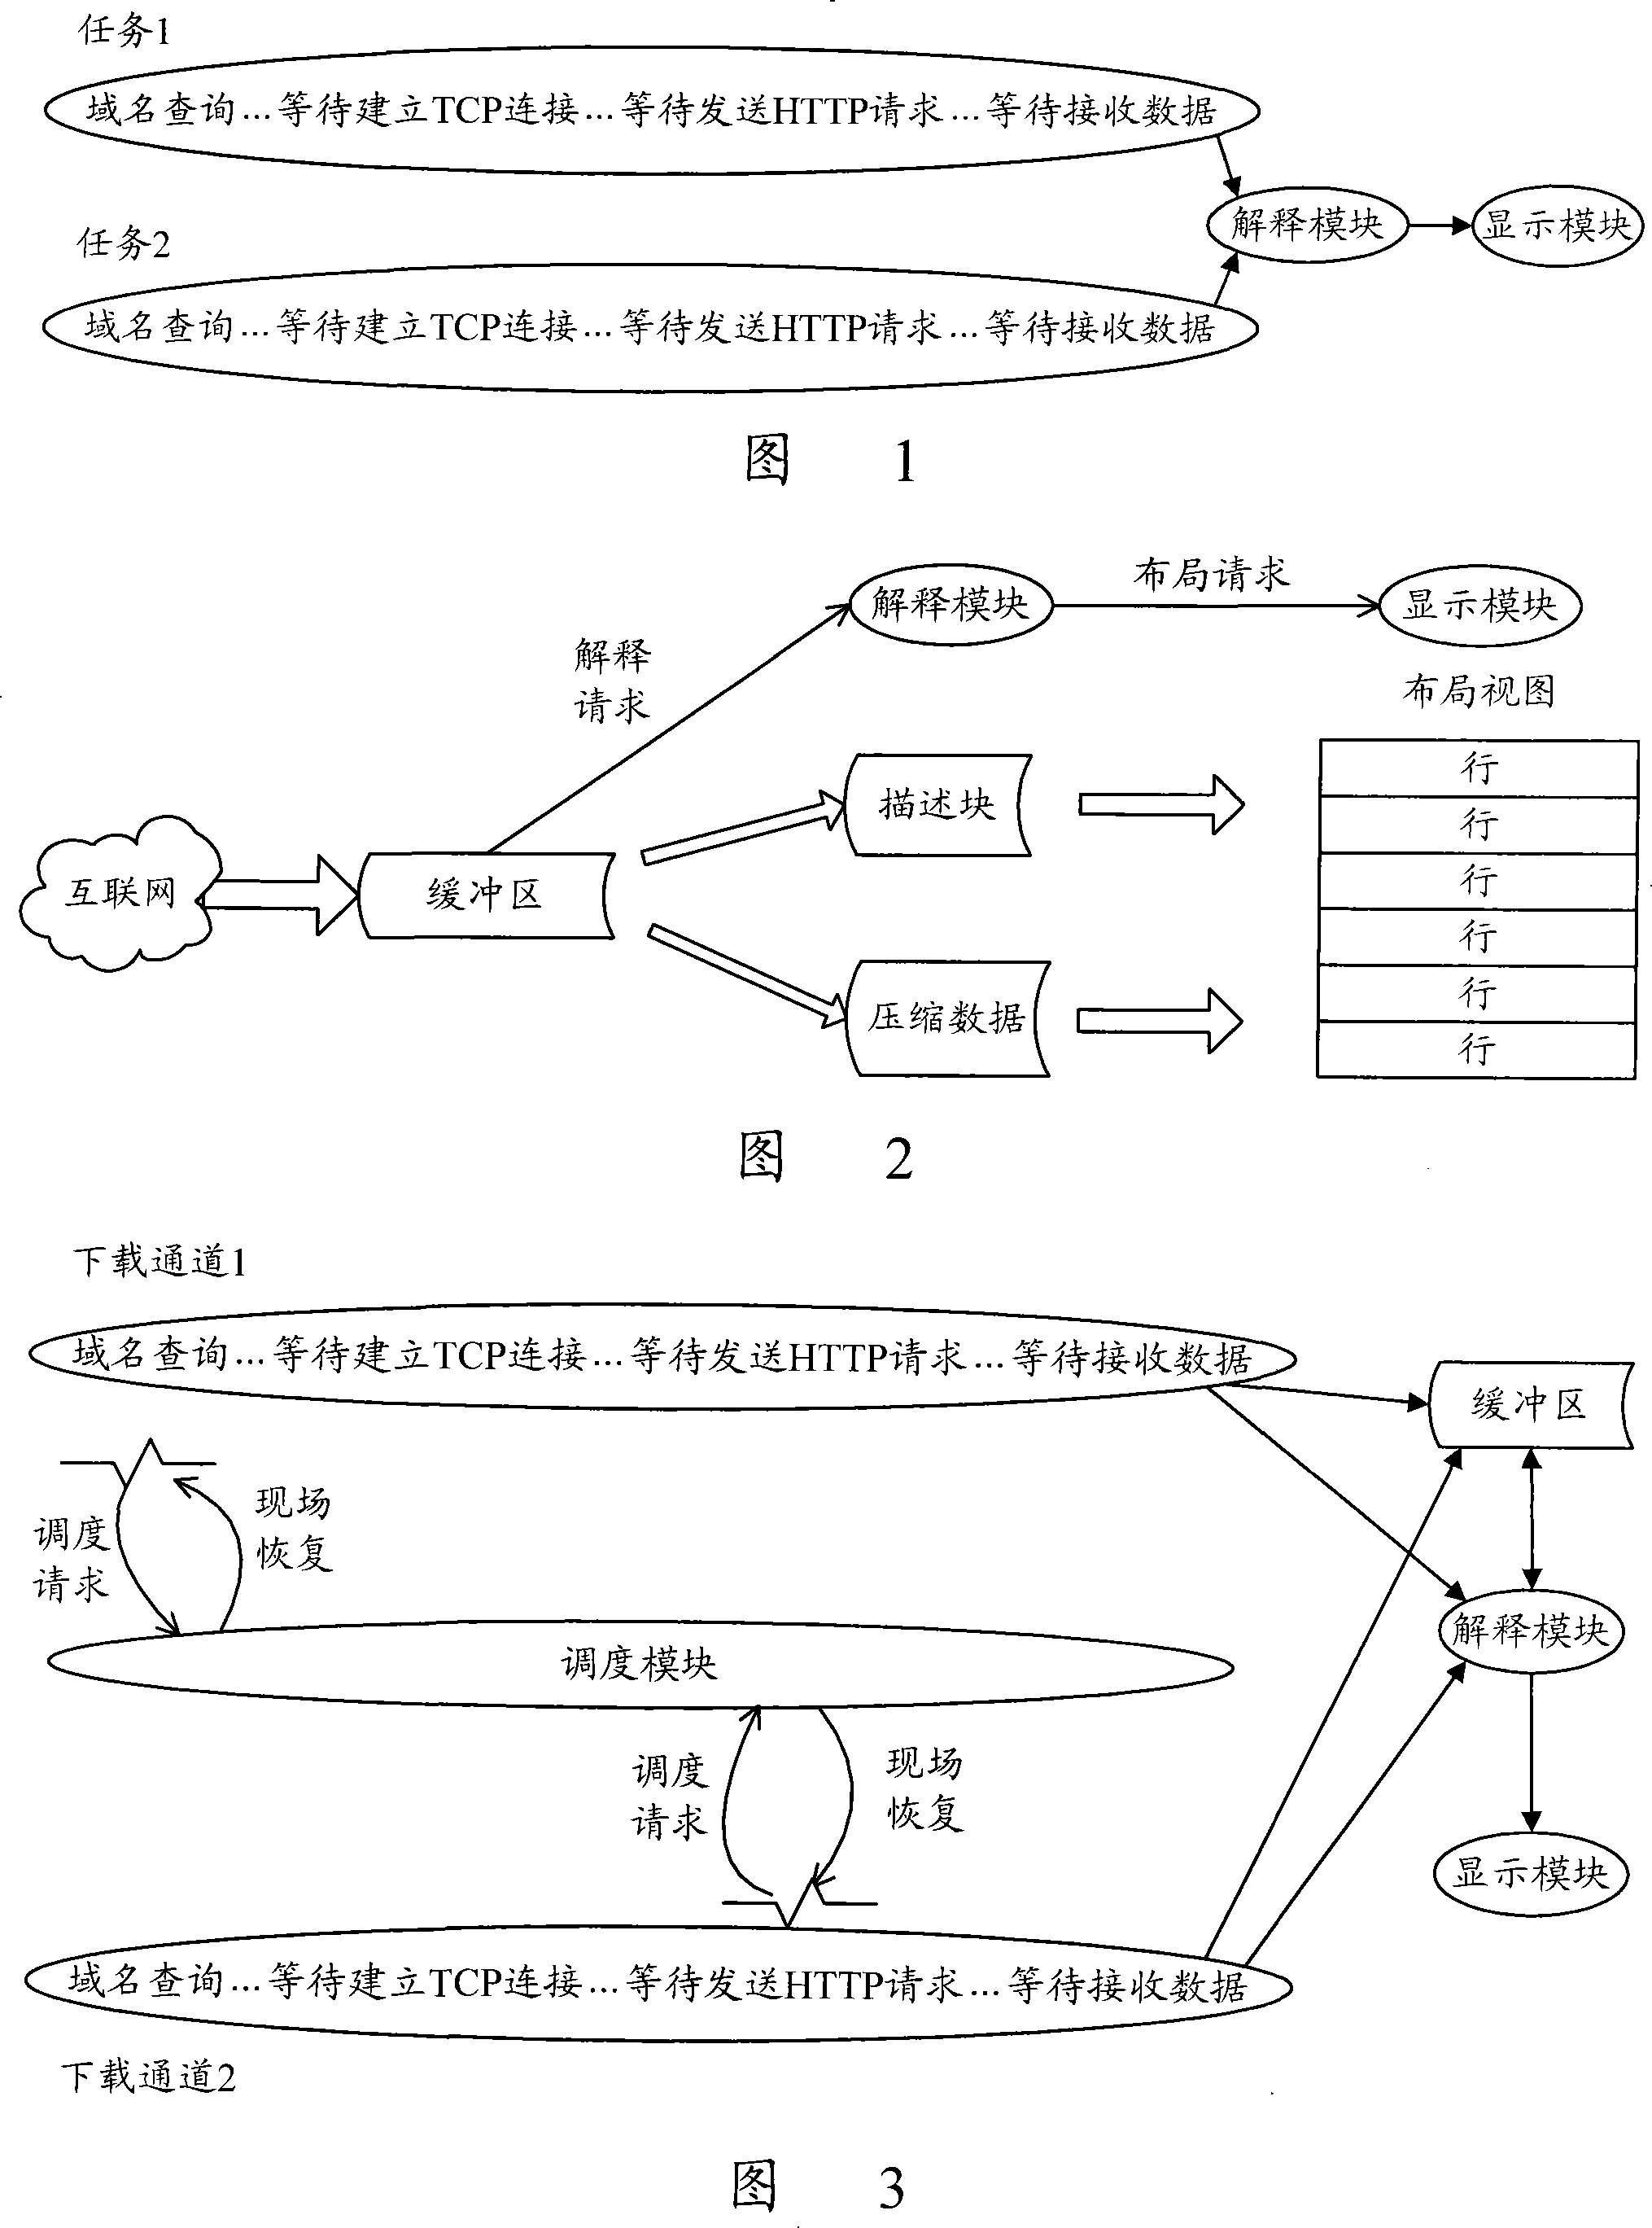 Method and device for optimizing user interactive performance of built-in browser